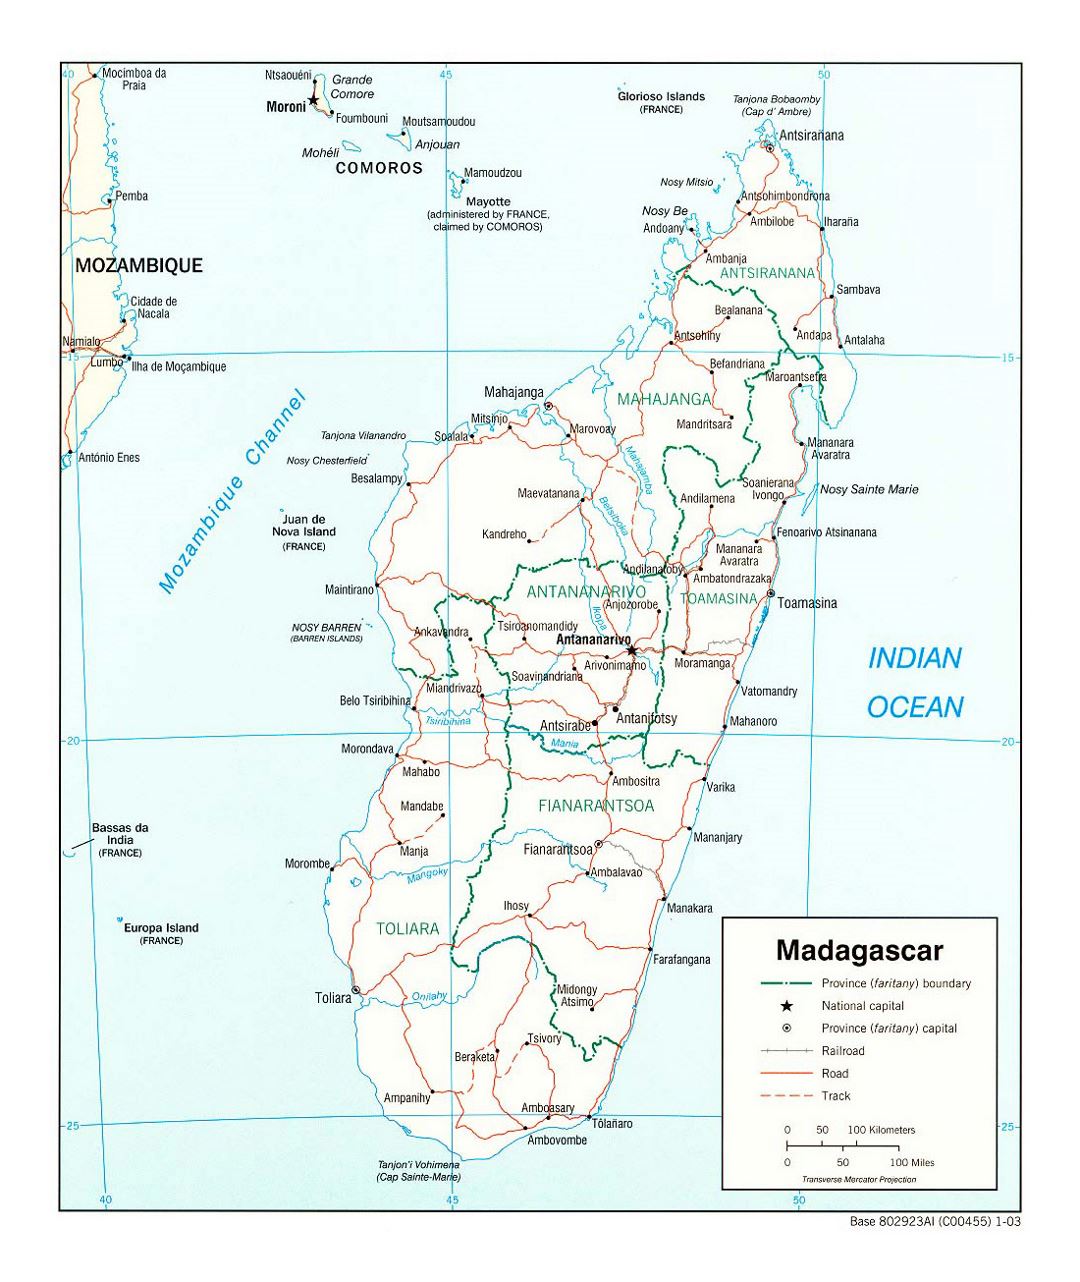 Detailed political and administrative map of Madagascar with roads, railroads and major cities - 2003